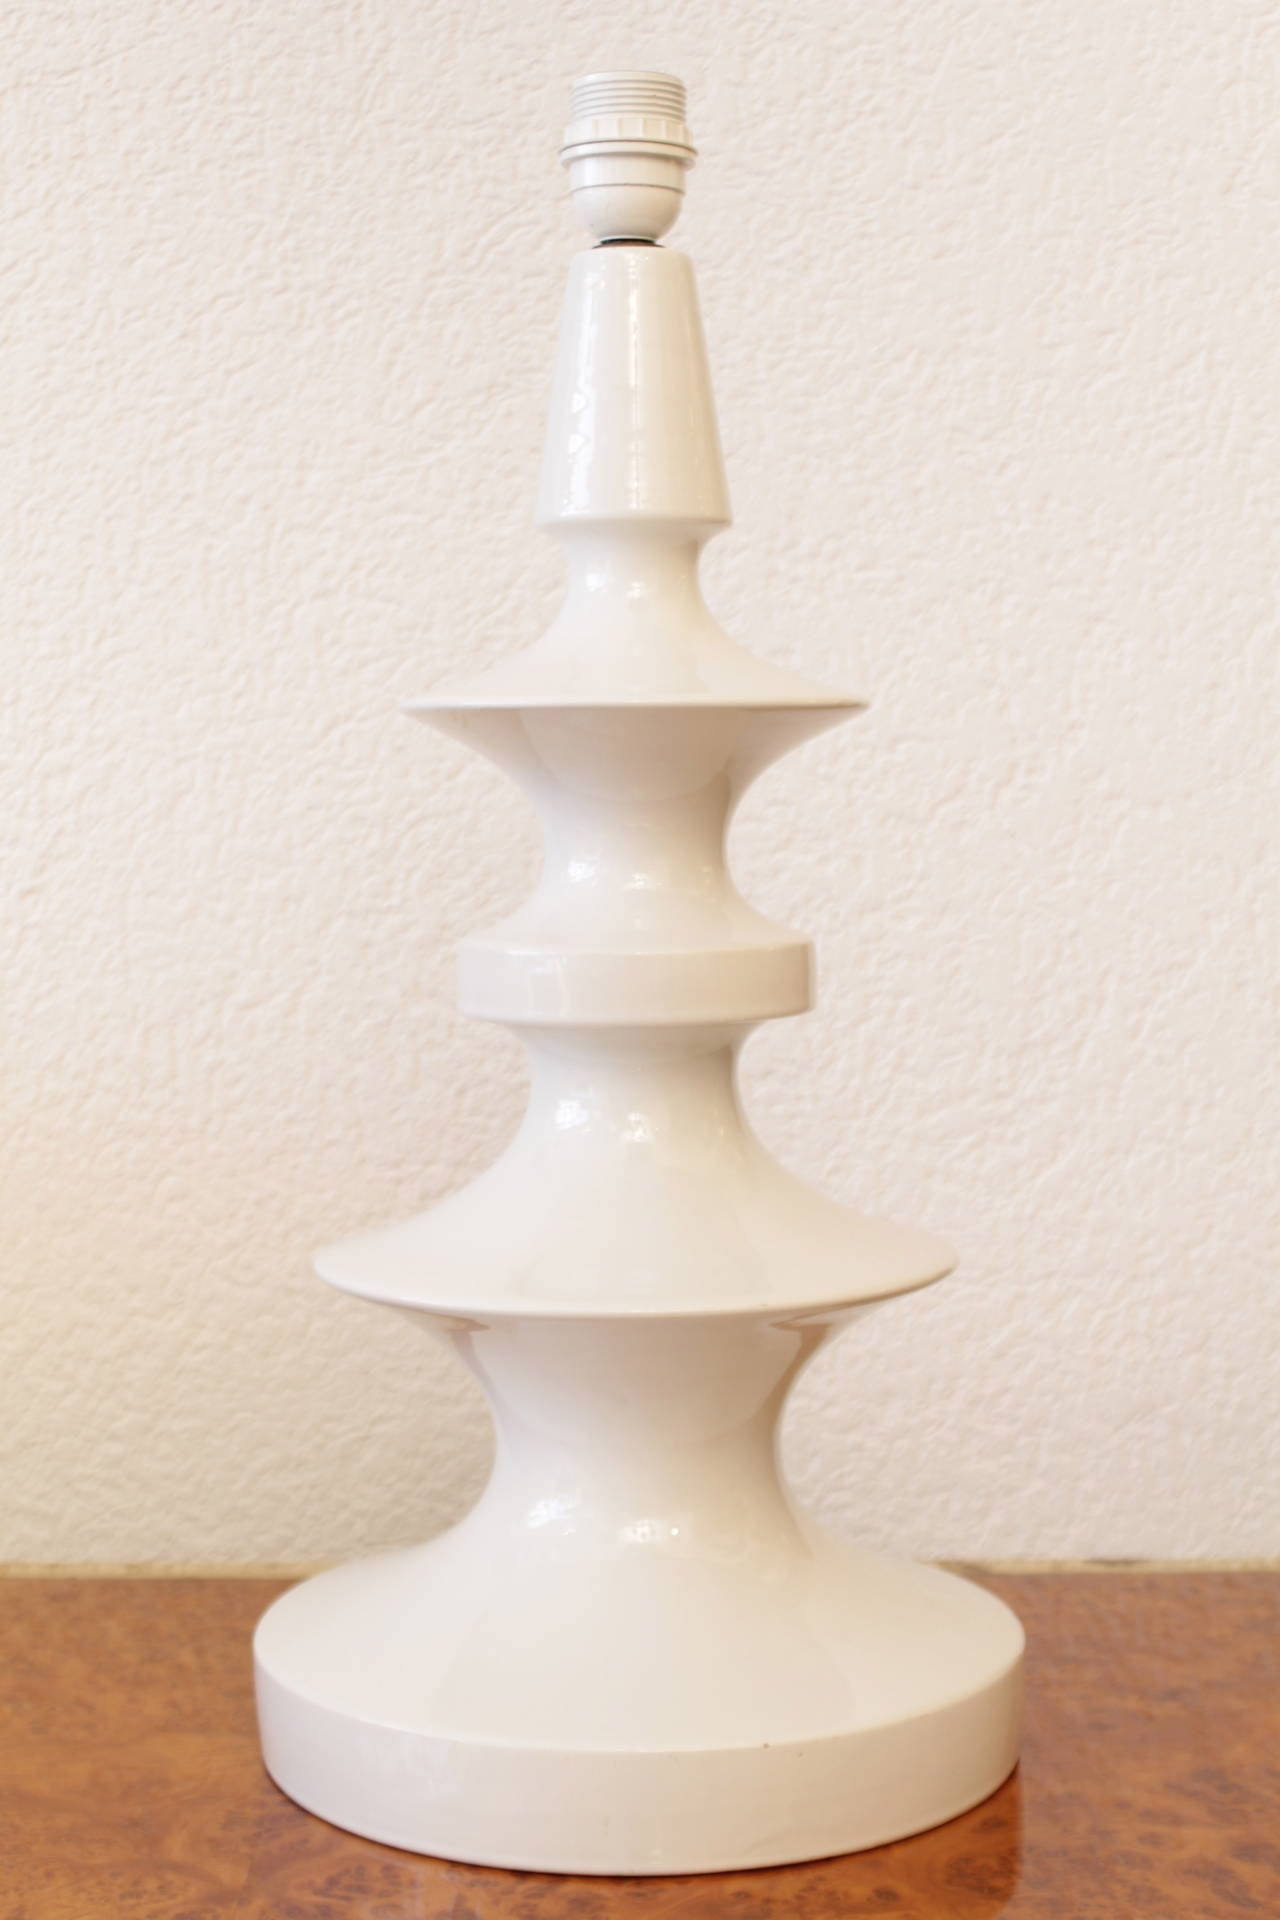 Glazed ceramic table lamp by Swiss ceramist Margrit Linck
Perfect condition. Without shade.